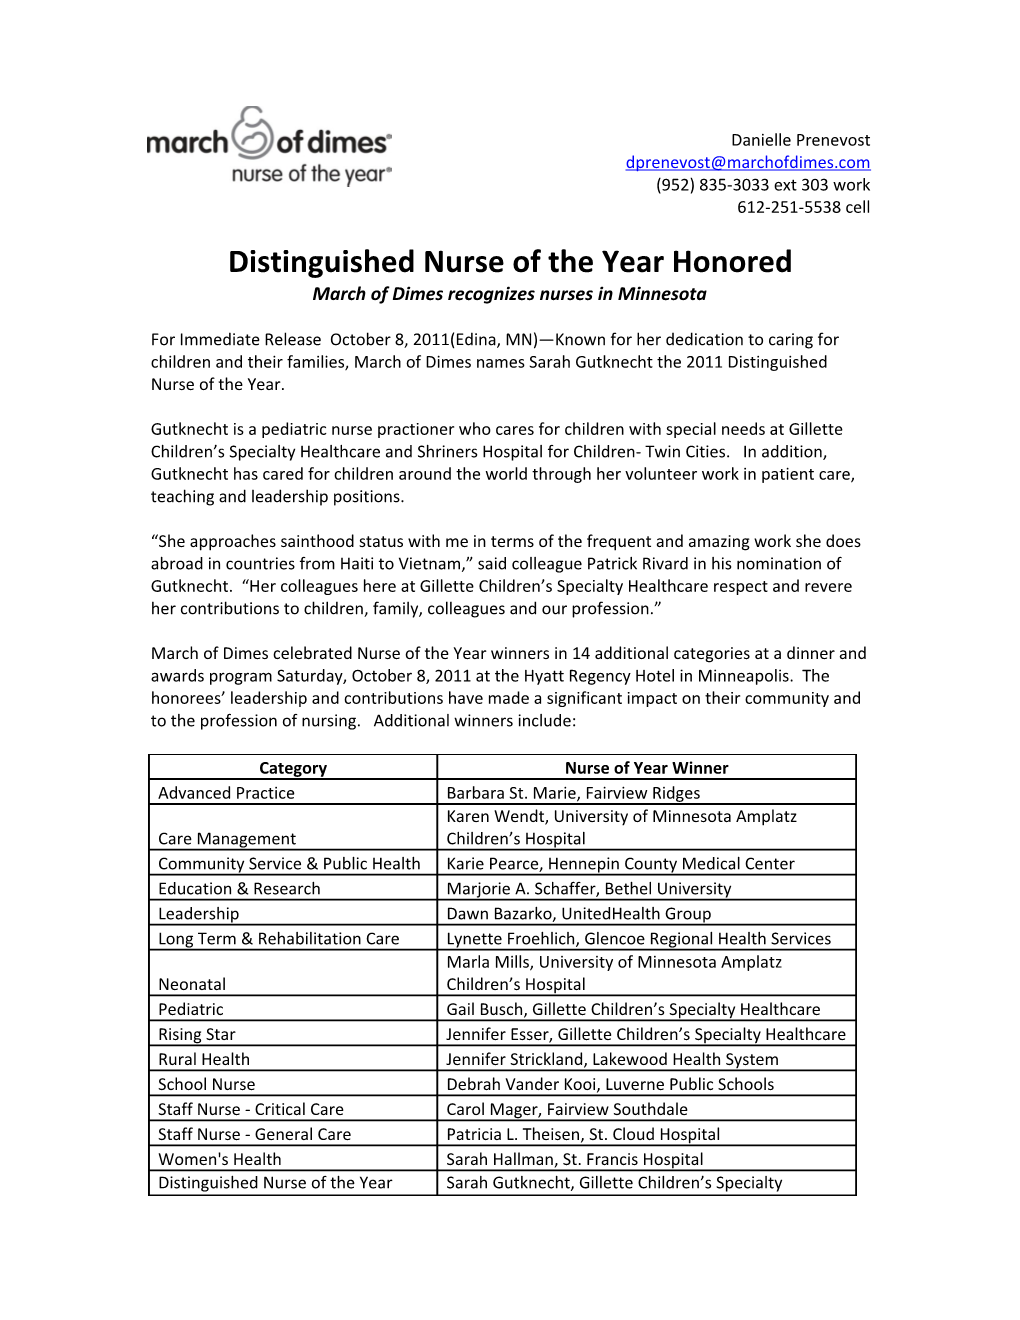 Distinguished Nurse of the Year Honored